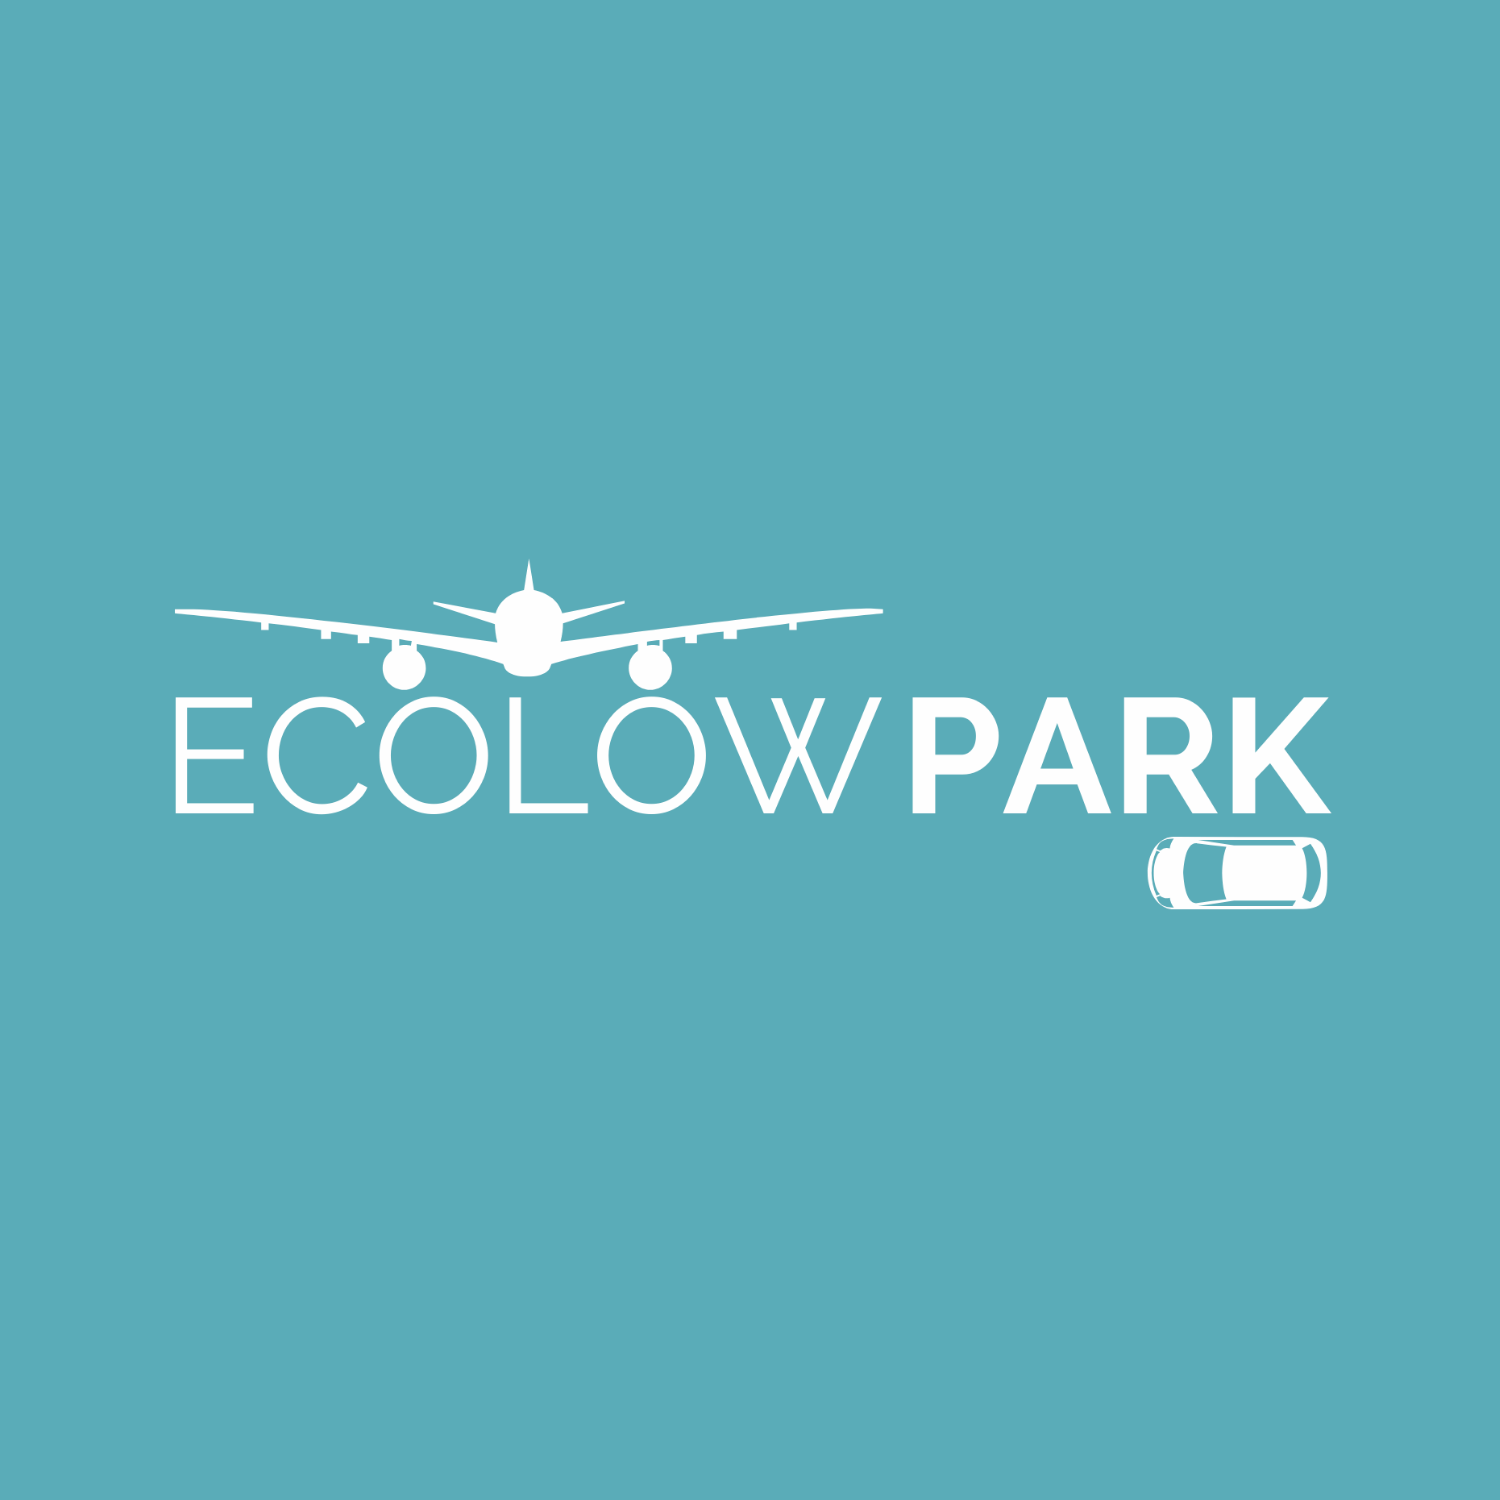 Ecolowpark Open Air – Marseille Airport